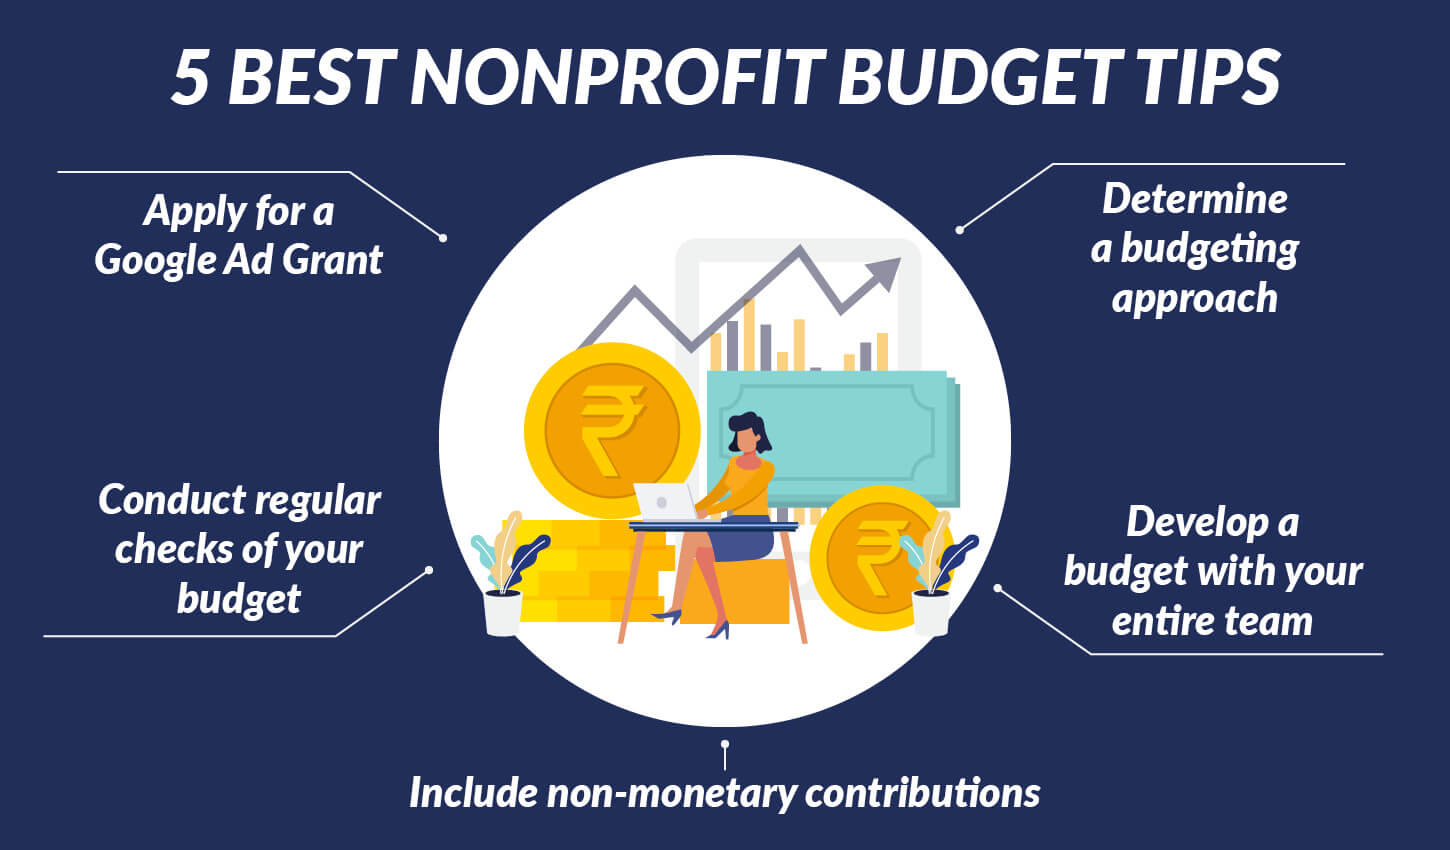 Follow these five tips to create a successful nonprofit budget.